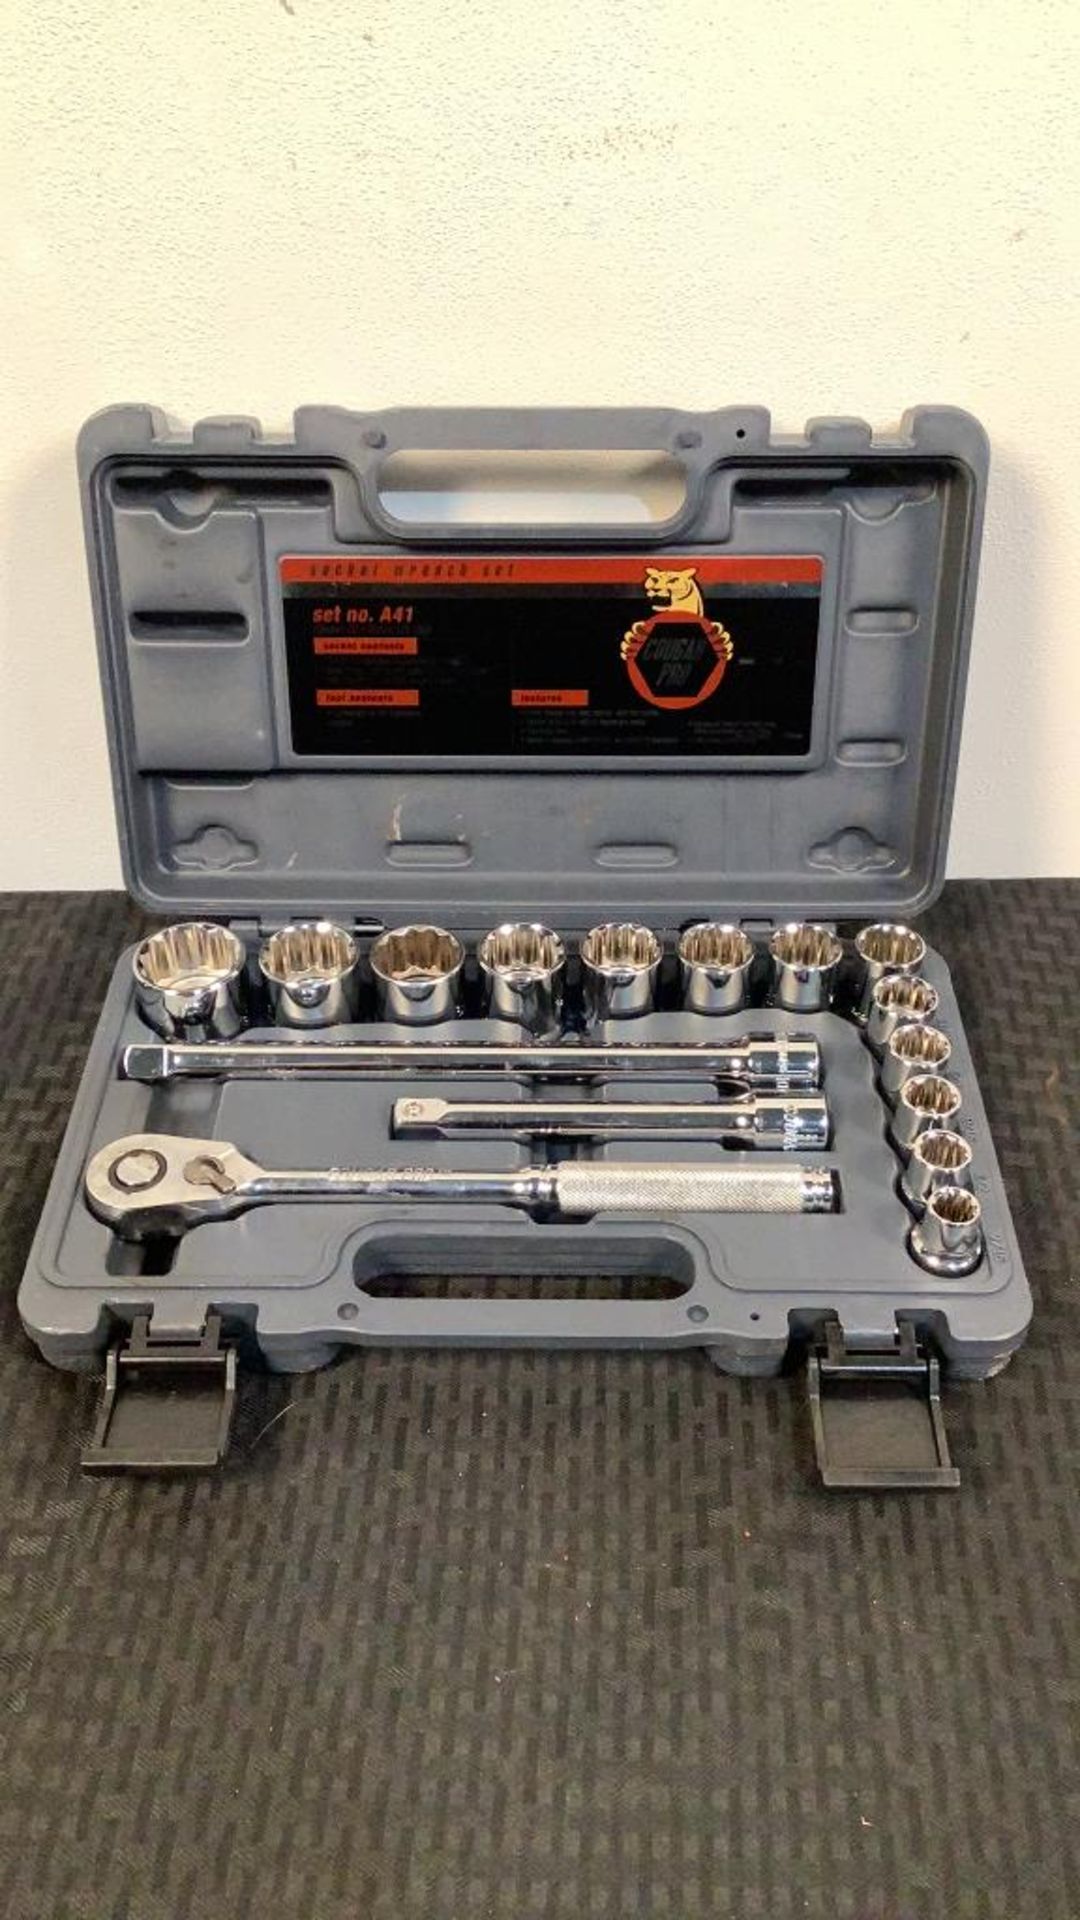 Cougar Pro 16 Piece Socket Wrench Set A41 - Image 3 of 10